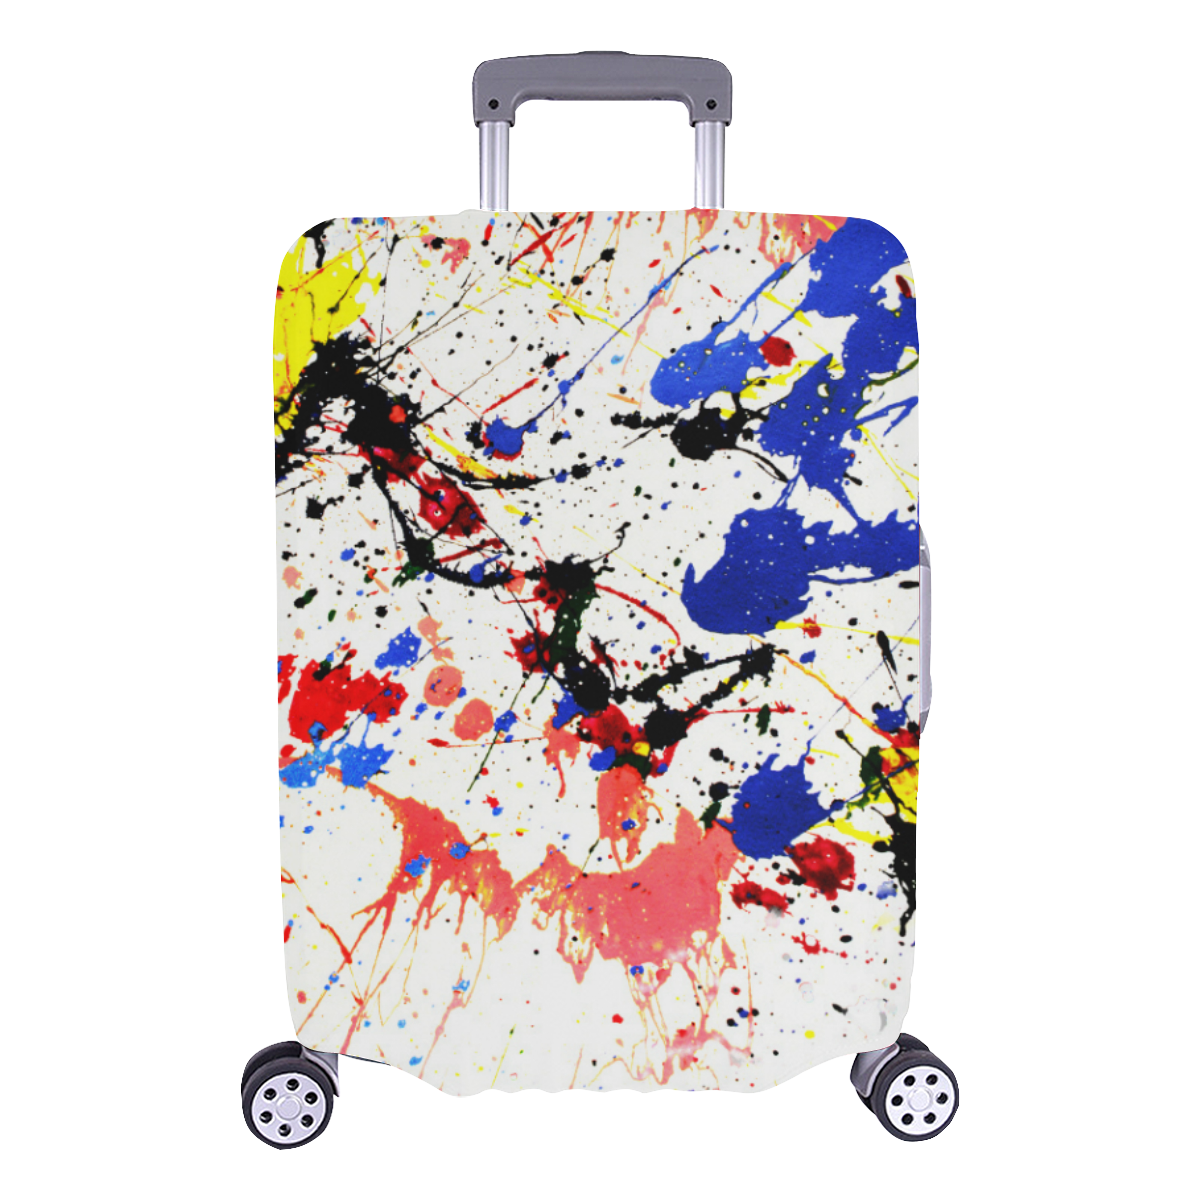 Luggage Cover/Large 26-28